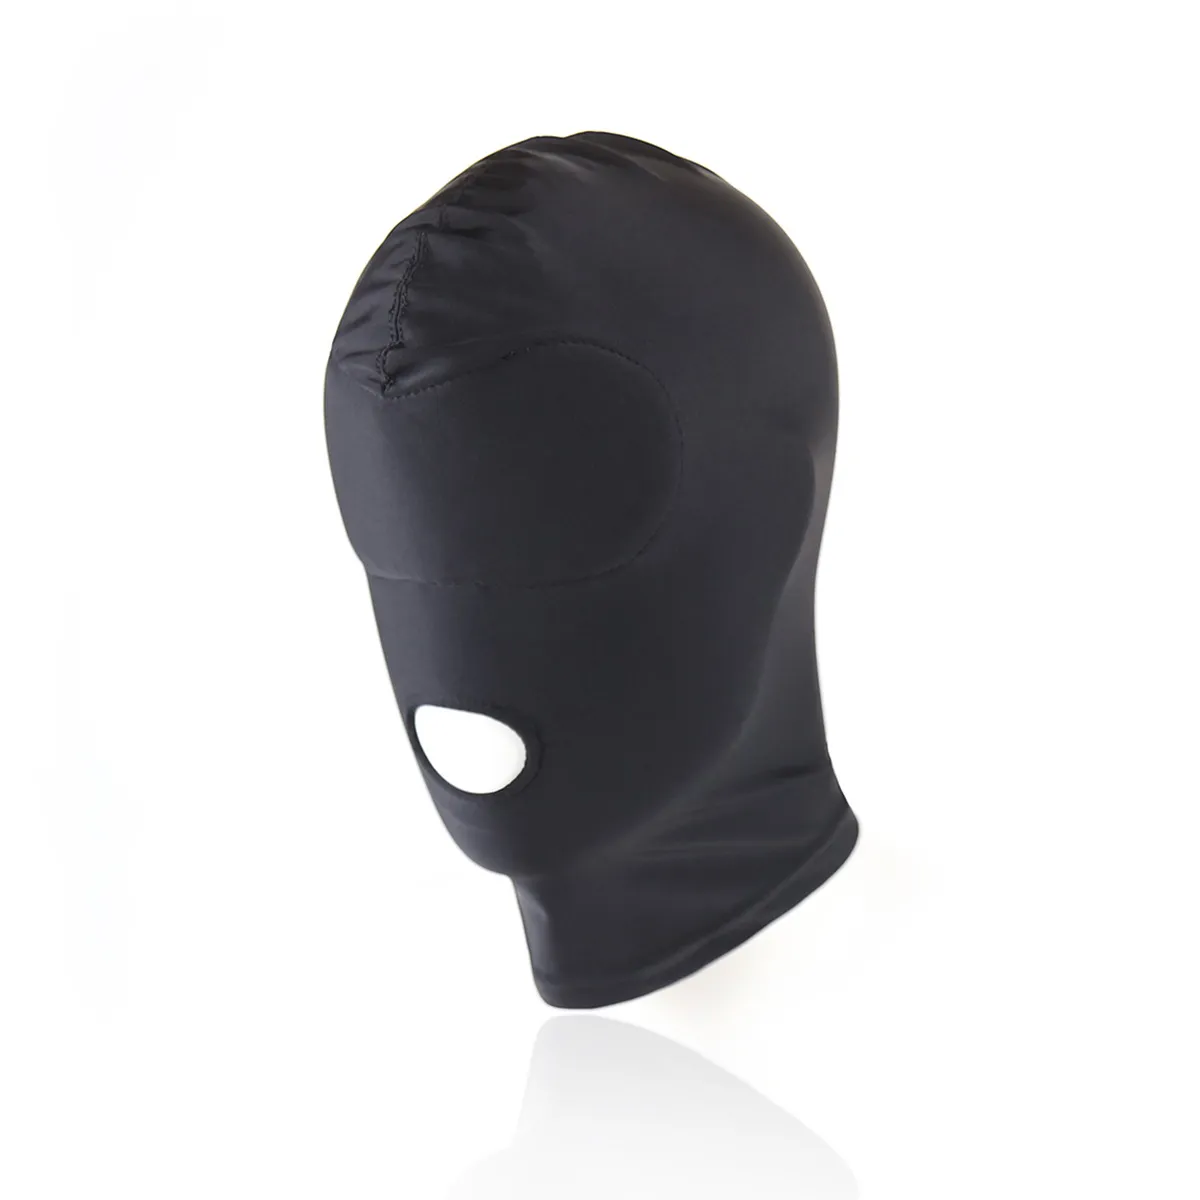 Sexy PU Leather Latex Hood Black Mask 4 tyles Breathable Headpiece Fetish BDSM Adult for party2197037